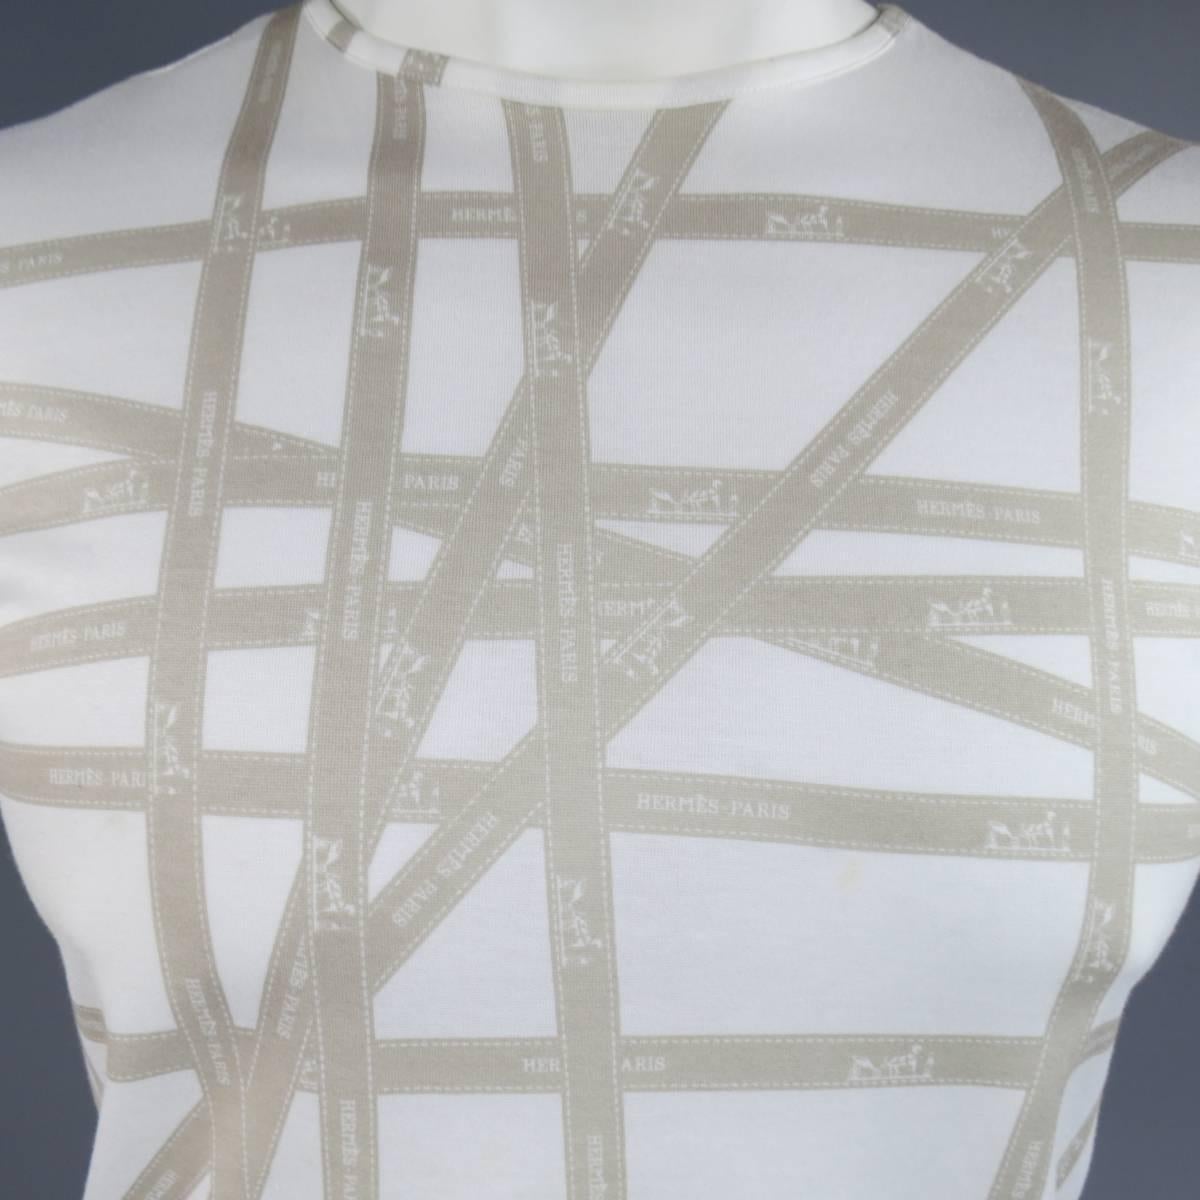 Vintage HERMES tee shirt in a light weight, semi sheer, white cotton with a crewneck, short sleeves, and all over taupe beige Hermes Bolduc ribbon print. Small stain shown in detail shot. Made in Italy.
 
Good Pre-Owned Condition.
Marked: XL
